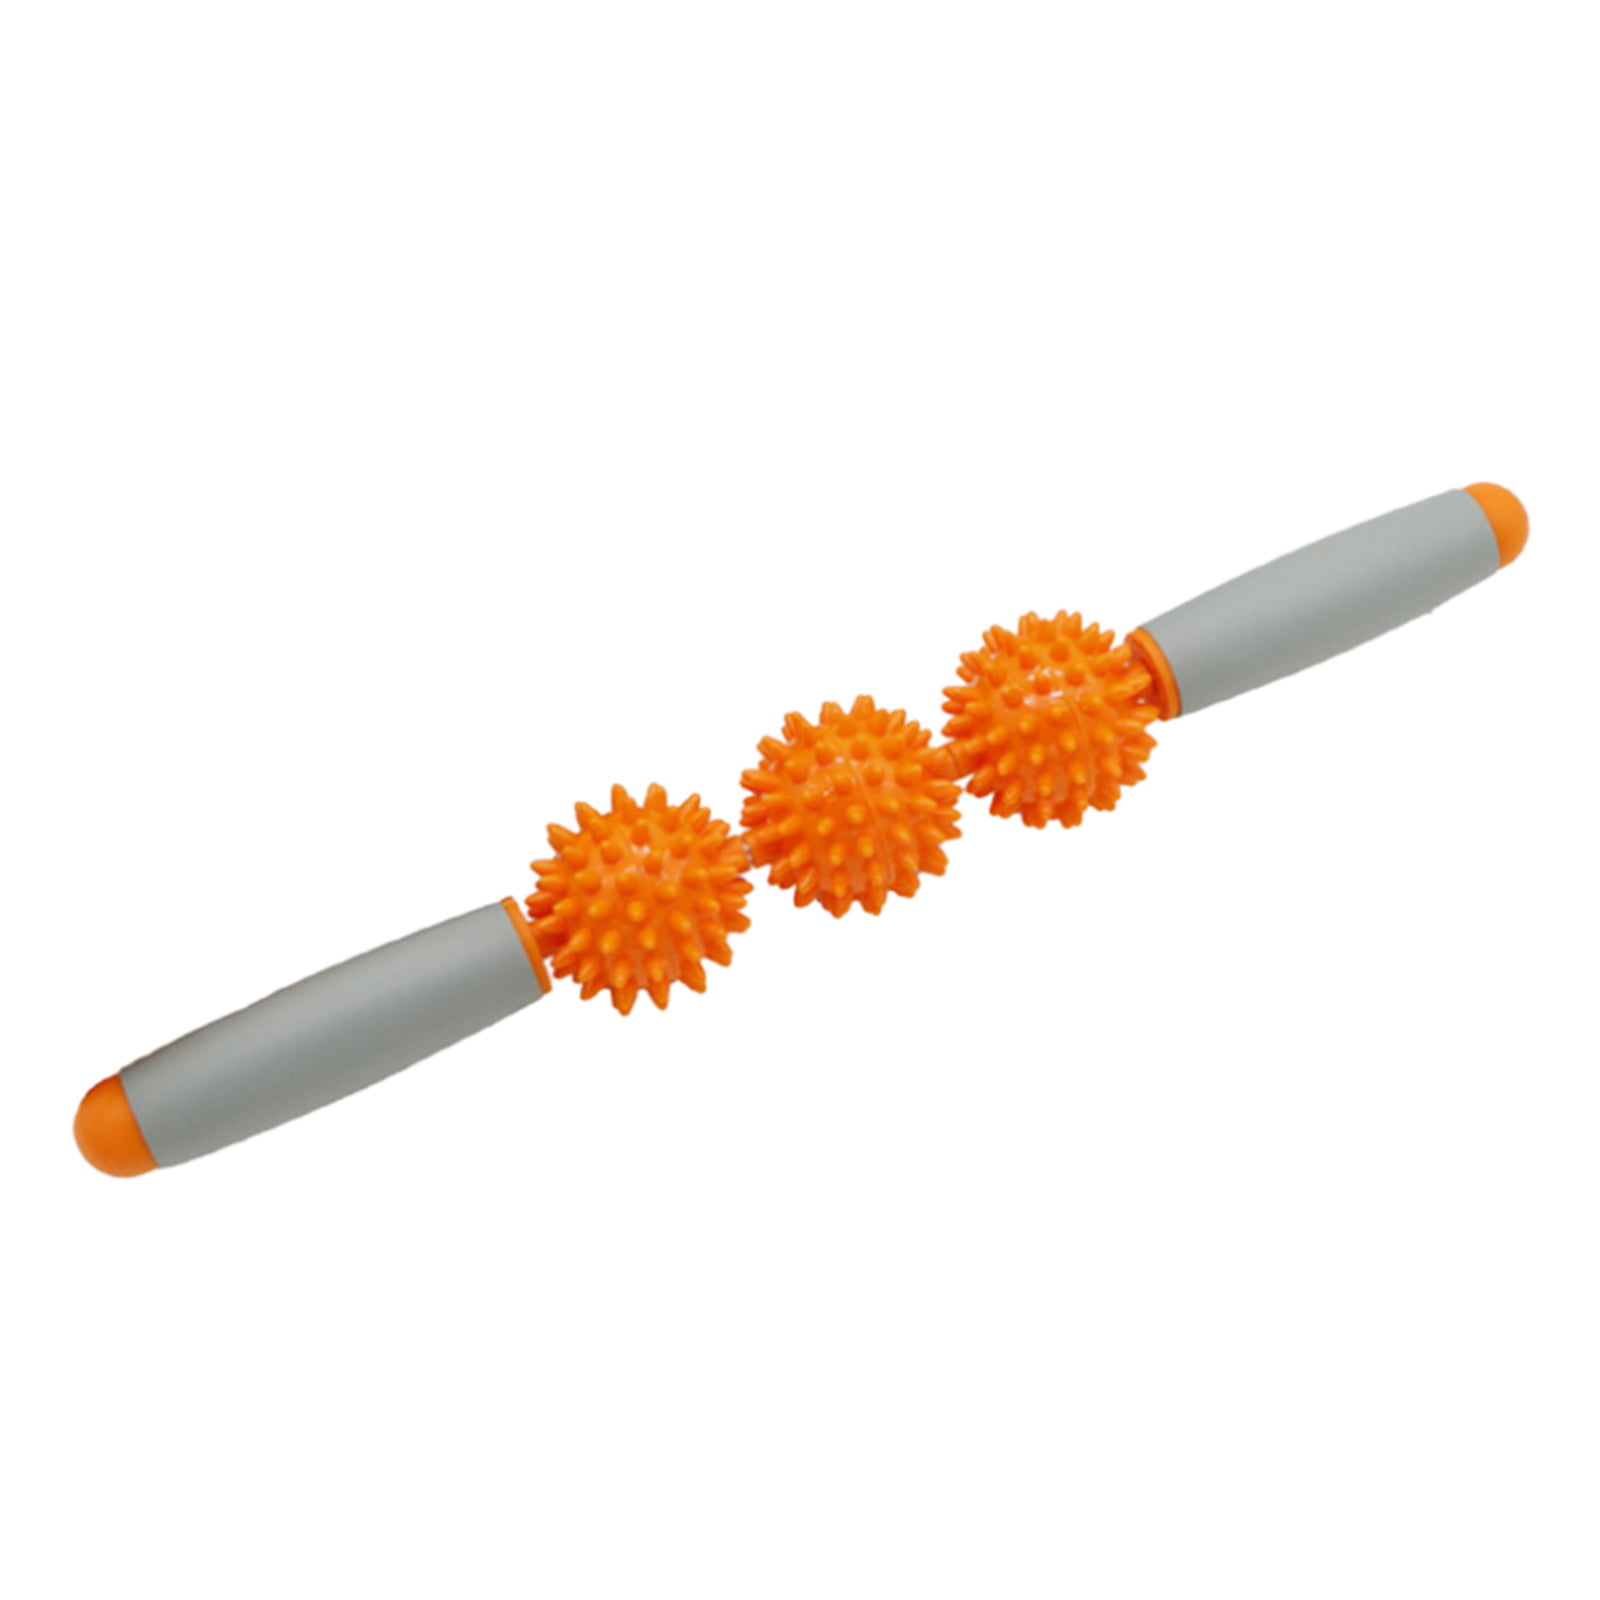 Arm Muscle Roller Stick.Roller Massage Stick,Muscle Massage Roller Tools for Athletes Runners Post-Workout HelpRecovery Massage Promotes Circulation,Legs Back Orange Thighs